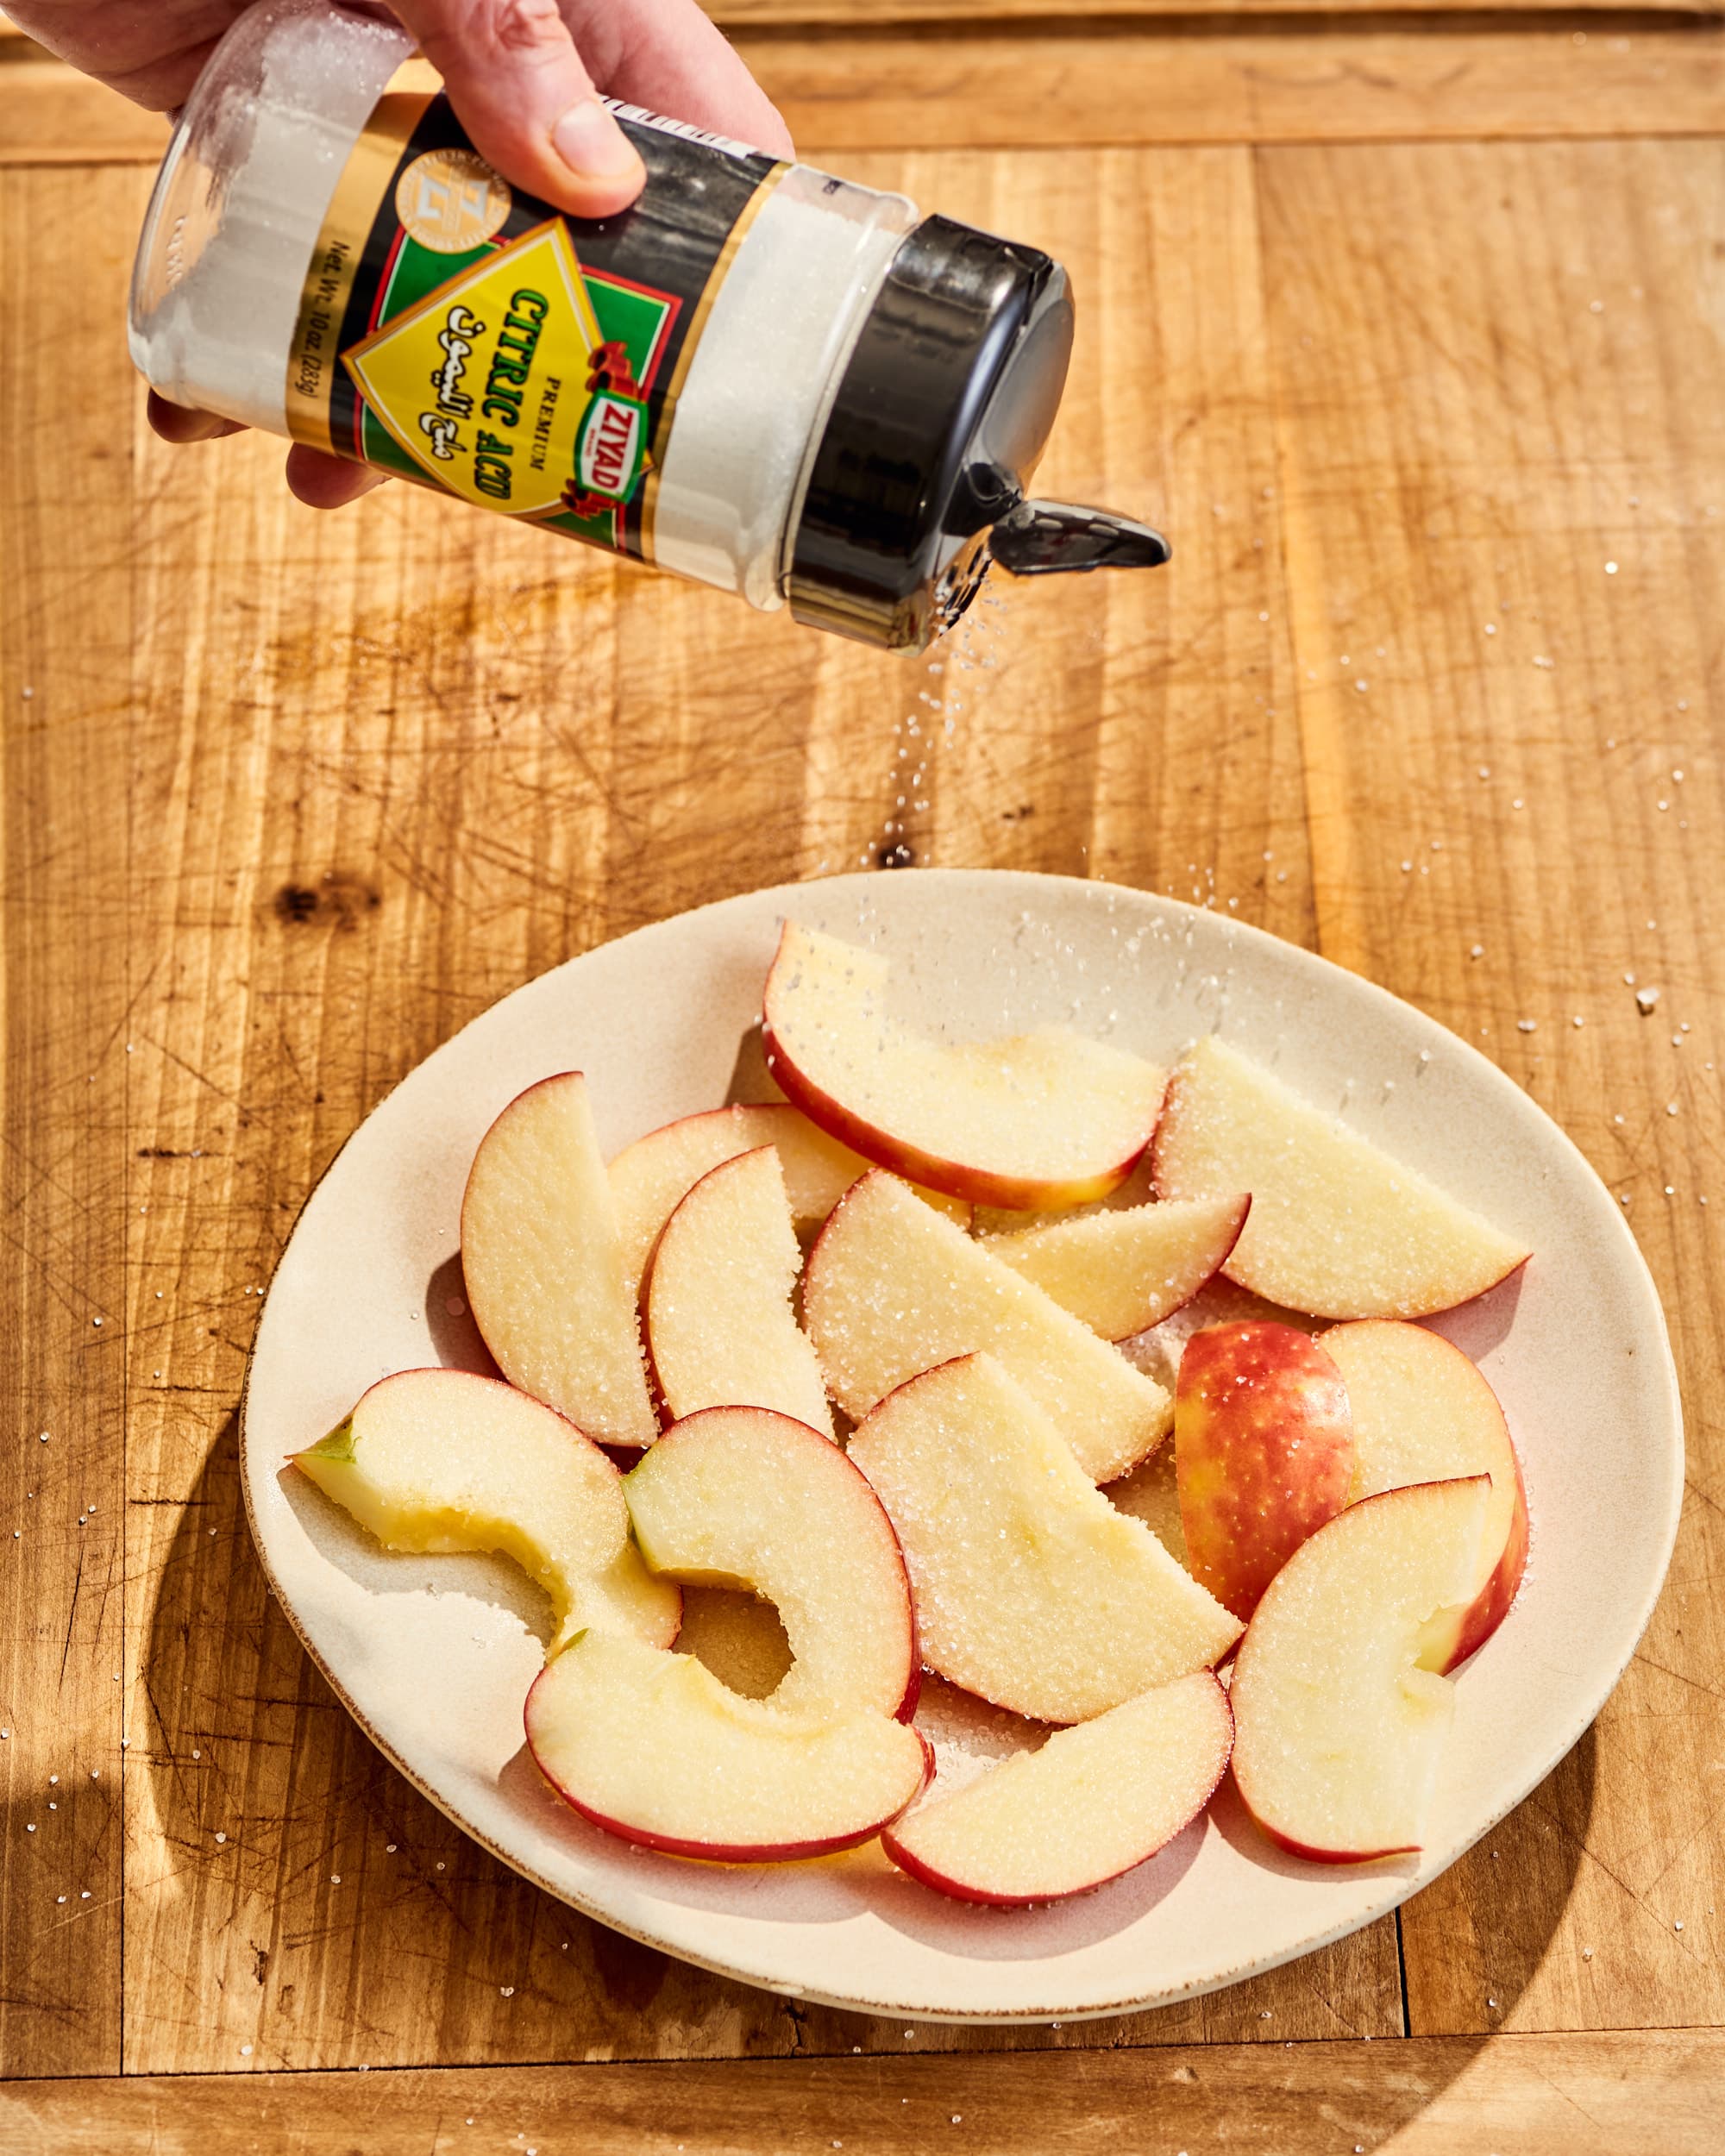 How to Keep Apples From Turning Brown (6 Easy Methods)